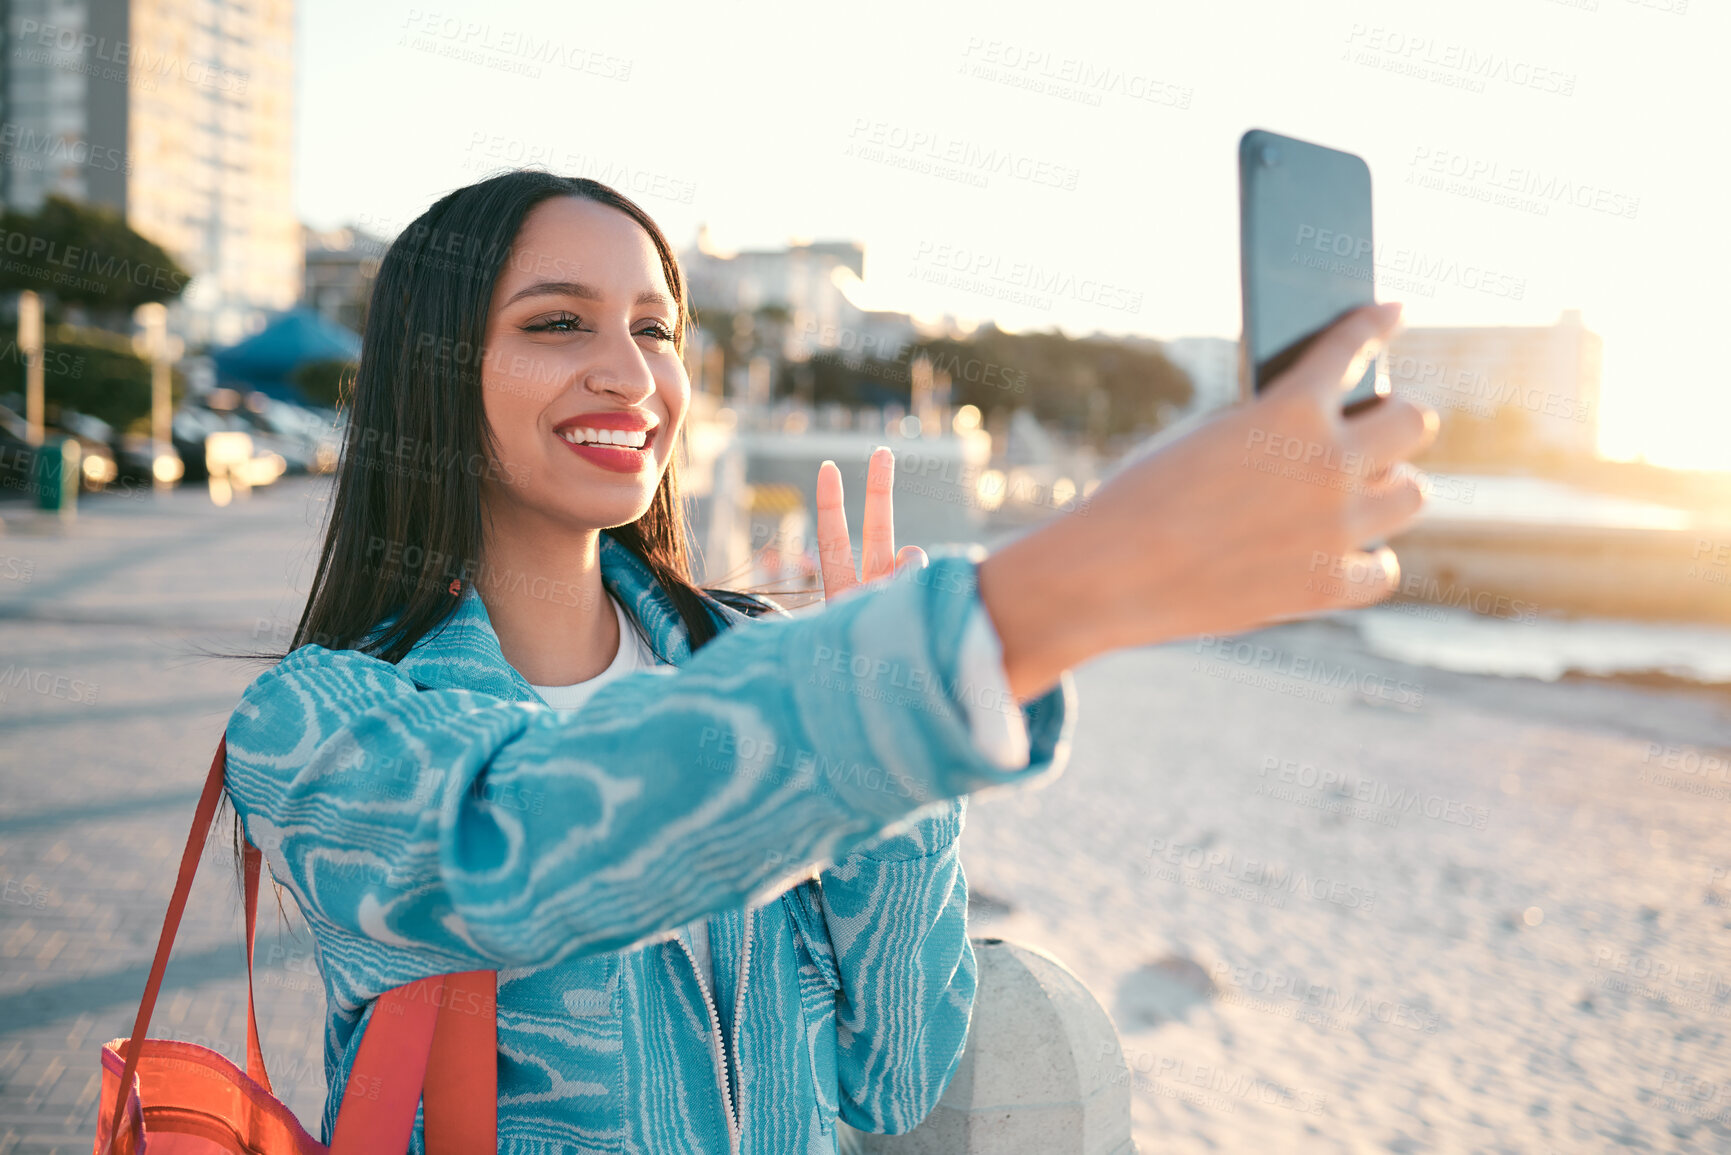 Buy stock photo Fun, happy and trendy student taking a selfie on phone for social media while exploring, visiting and enjoying city. Stylish, edgy and funky woman taking photos on vacation while sightseeing town